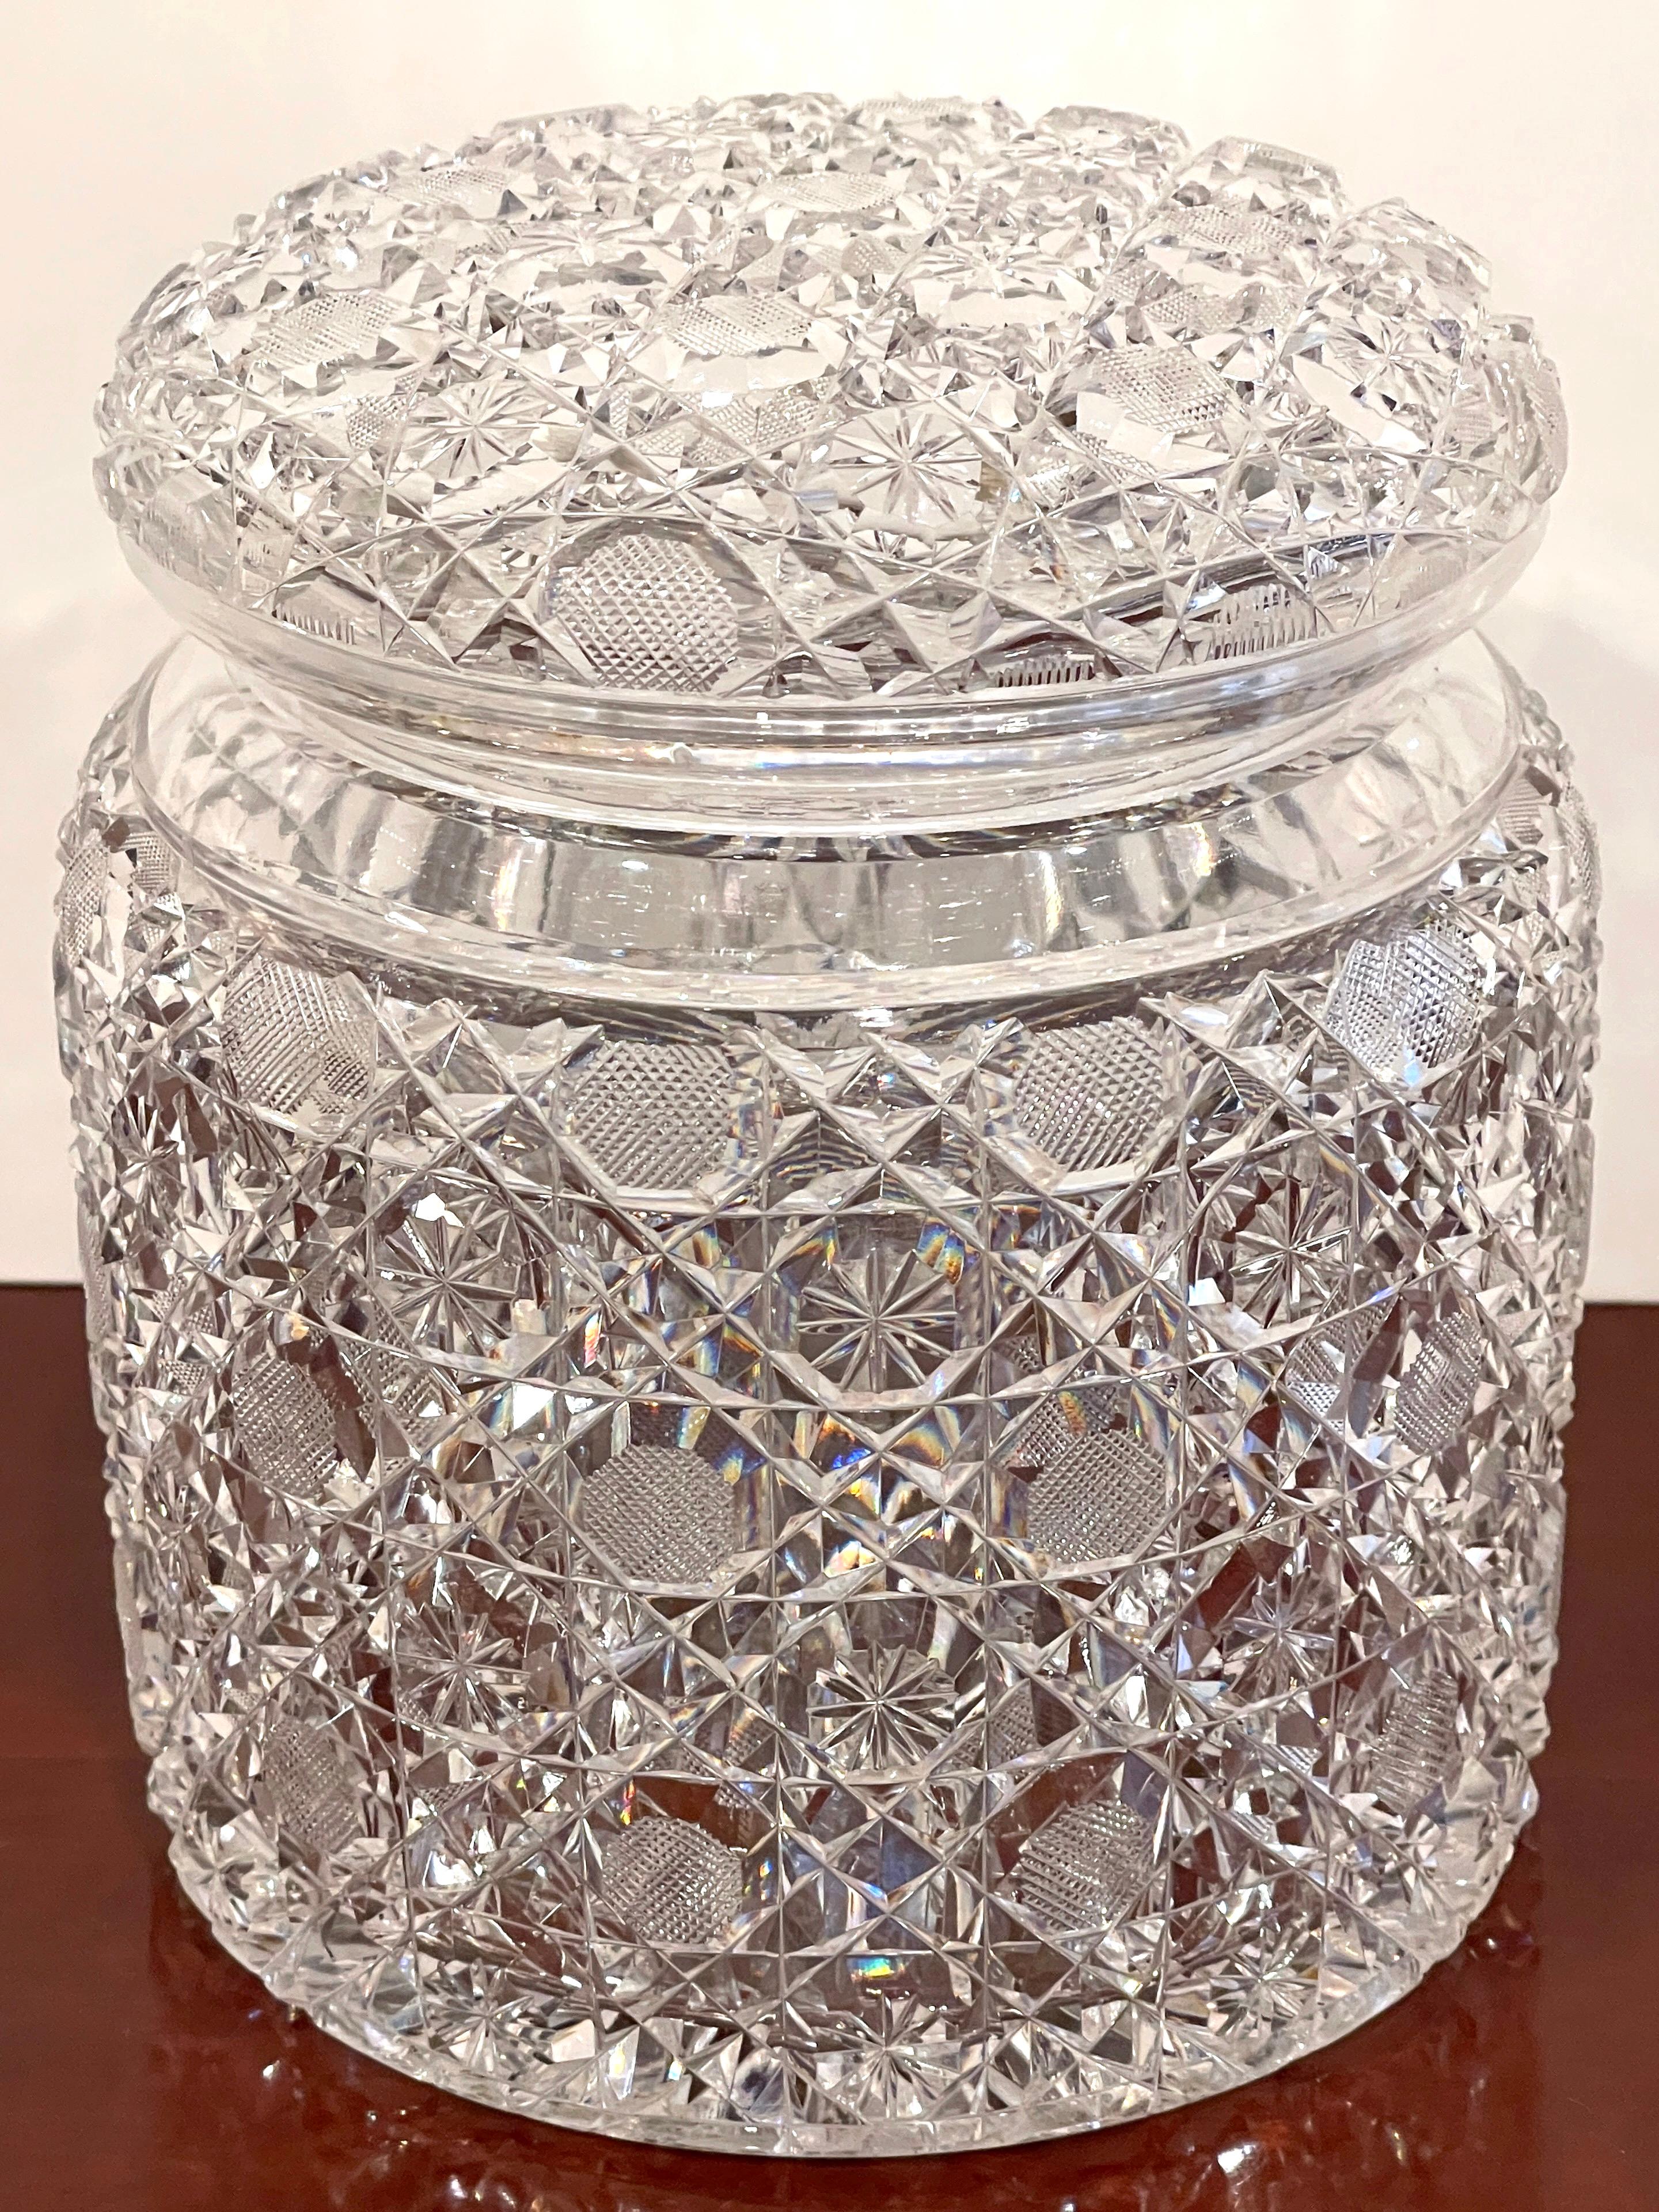 American Brilliant Cut Glass 'Russian'Pattern Covered Jar/ Humidor
Circa 1890s, Attributed to T.G. Hawkes & Co. 

A remarkable piece of American Brilliant Cut Glass craftsmanship: a 'Russian' Pattern Covered Jar/Humidor dating back to the 1890s.